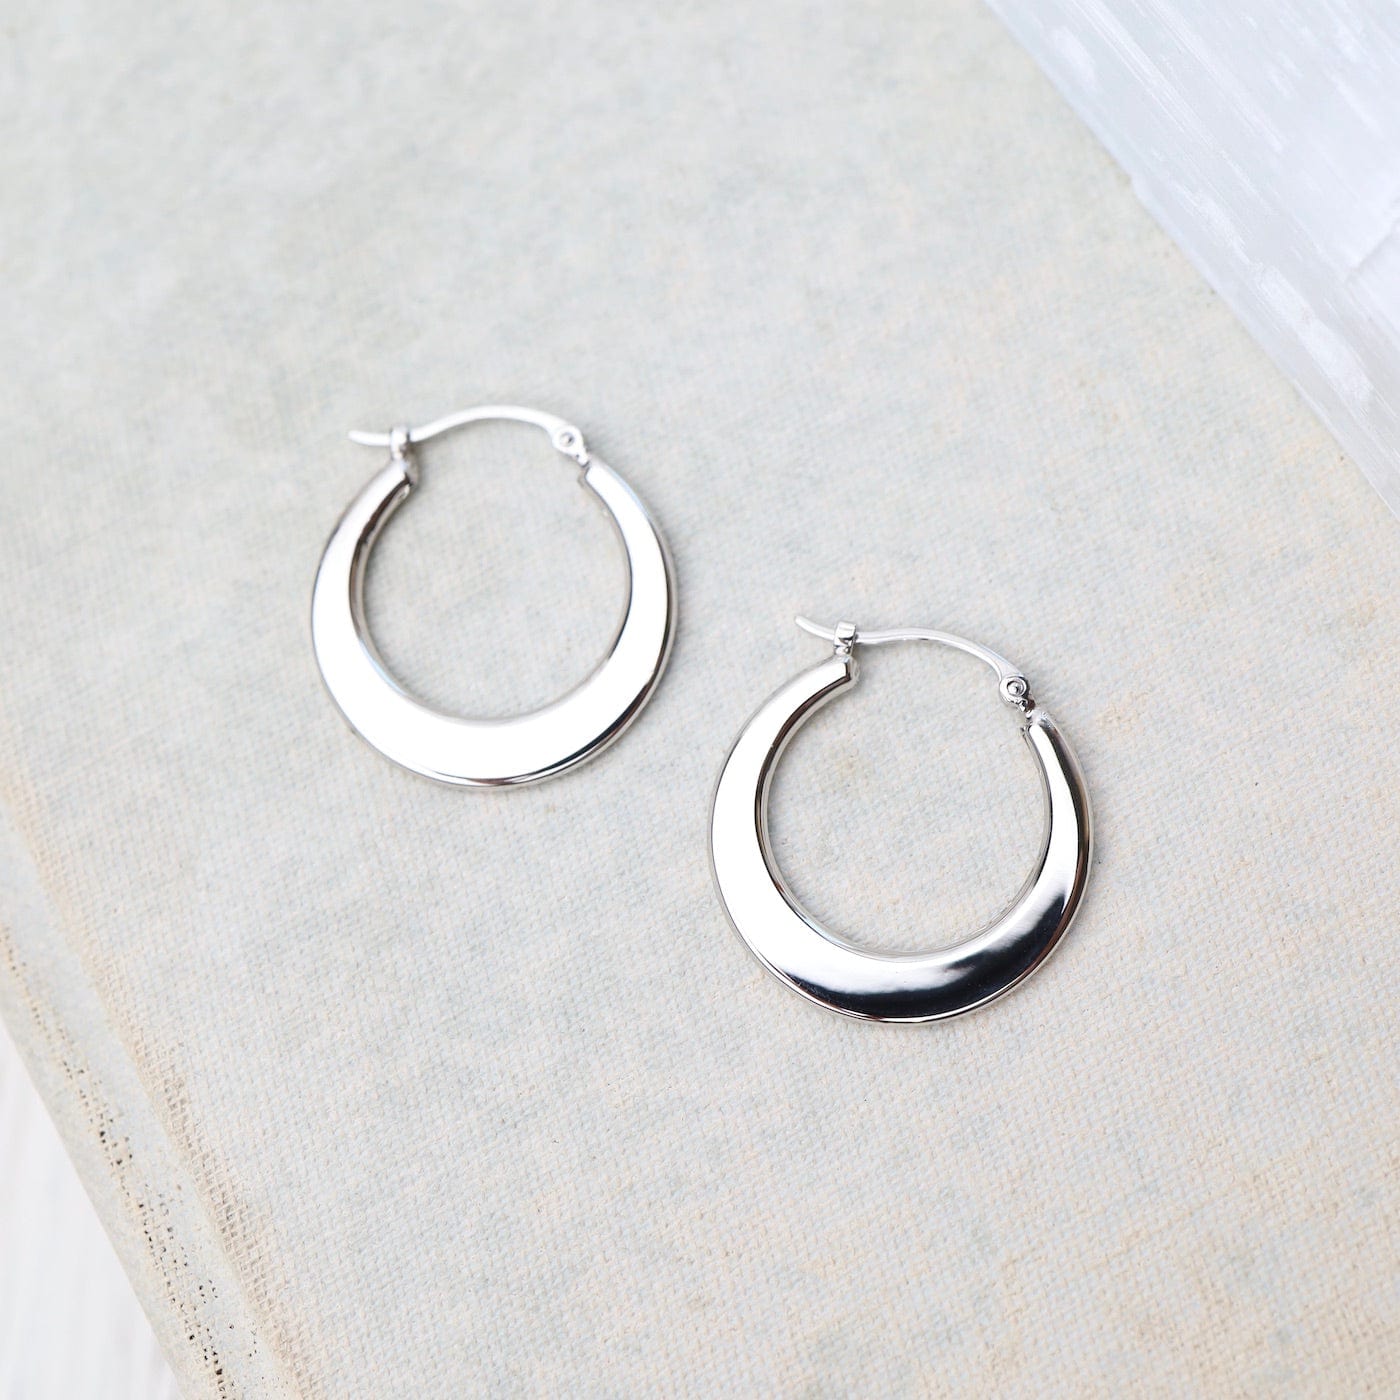 EAR-14K 14k White Gold Small Flat Crescent Hoops